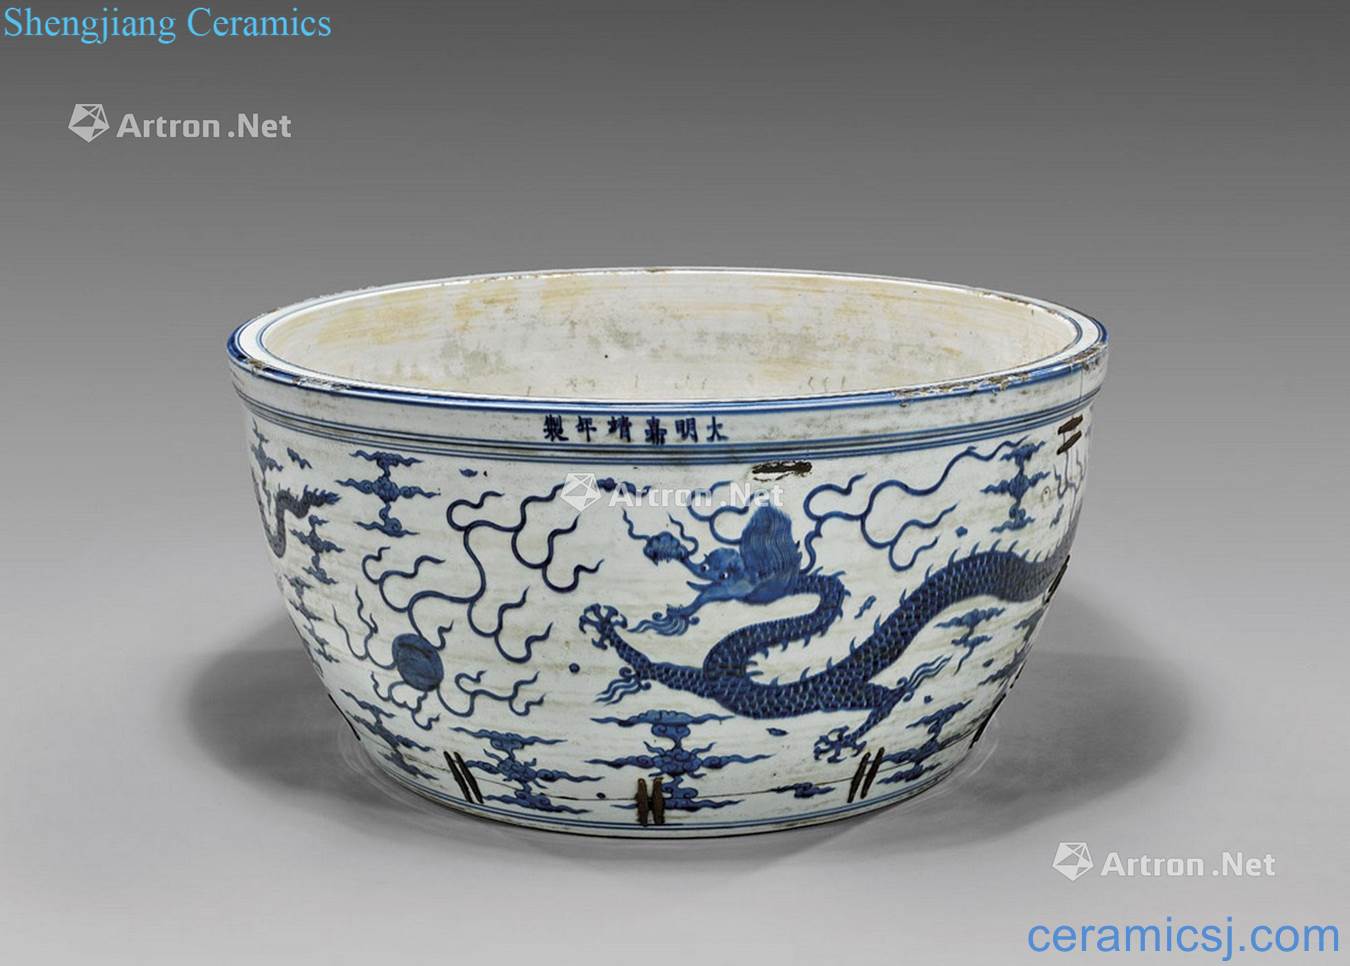 The Ming dynasty Golden dragon with five claws tank of blue and white porcelain